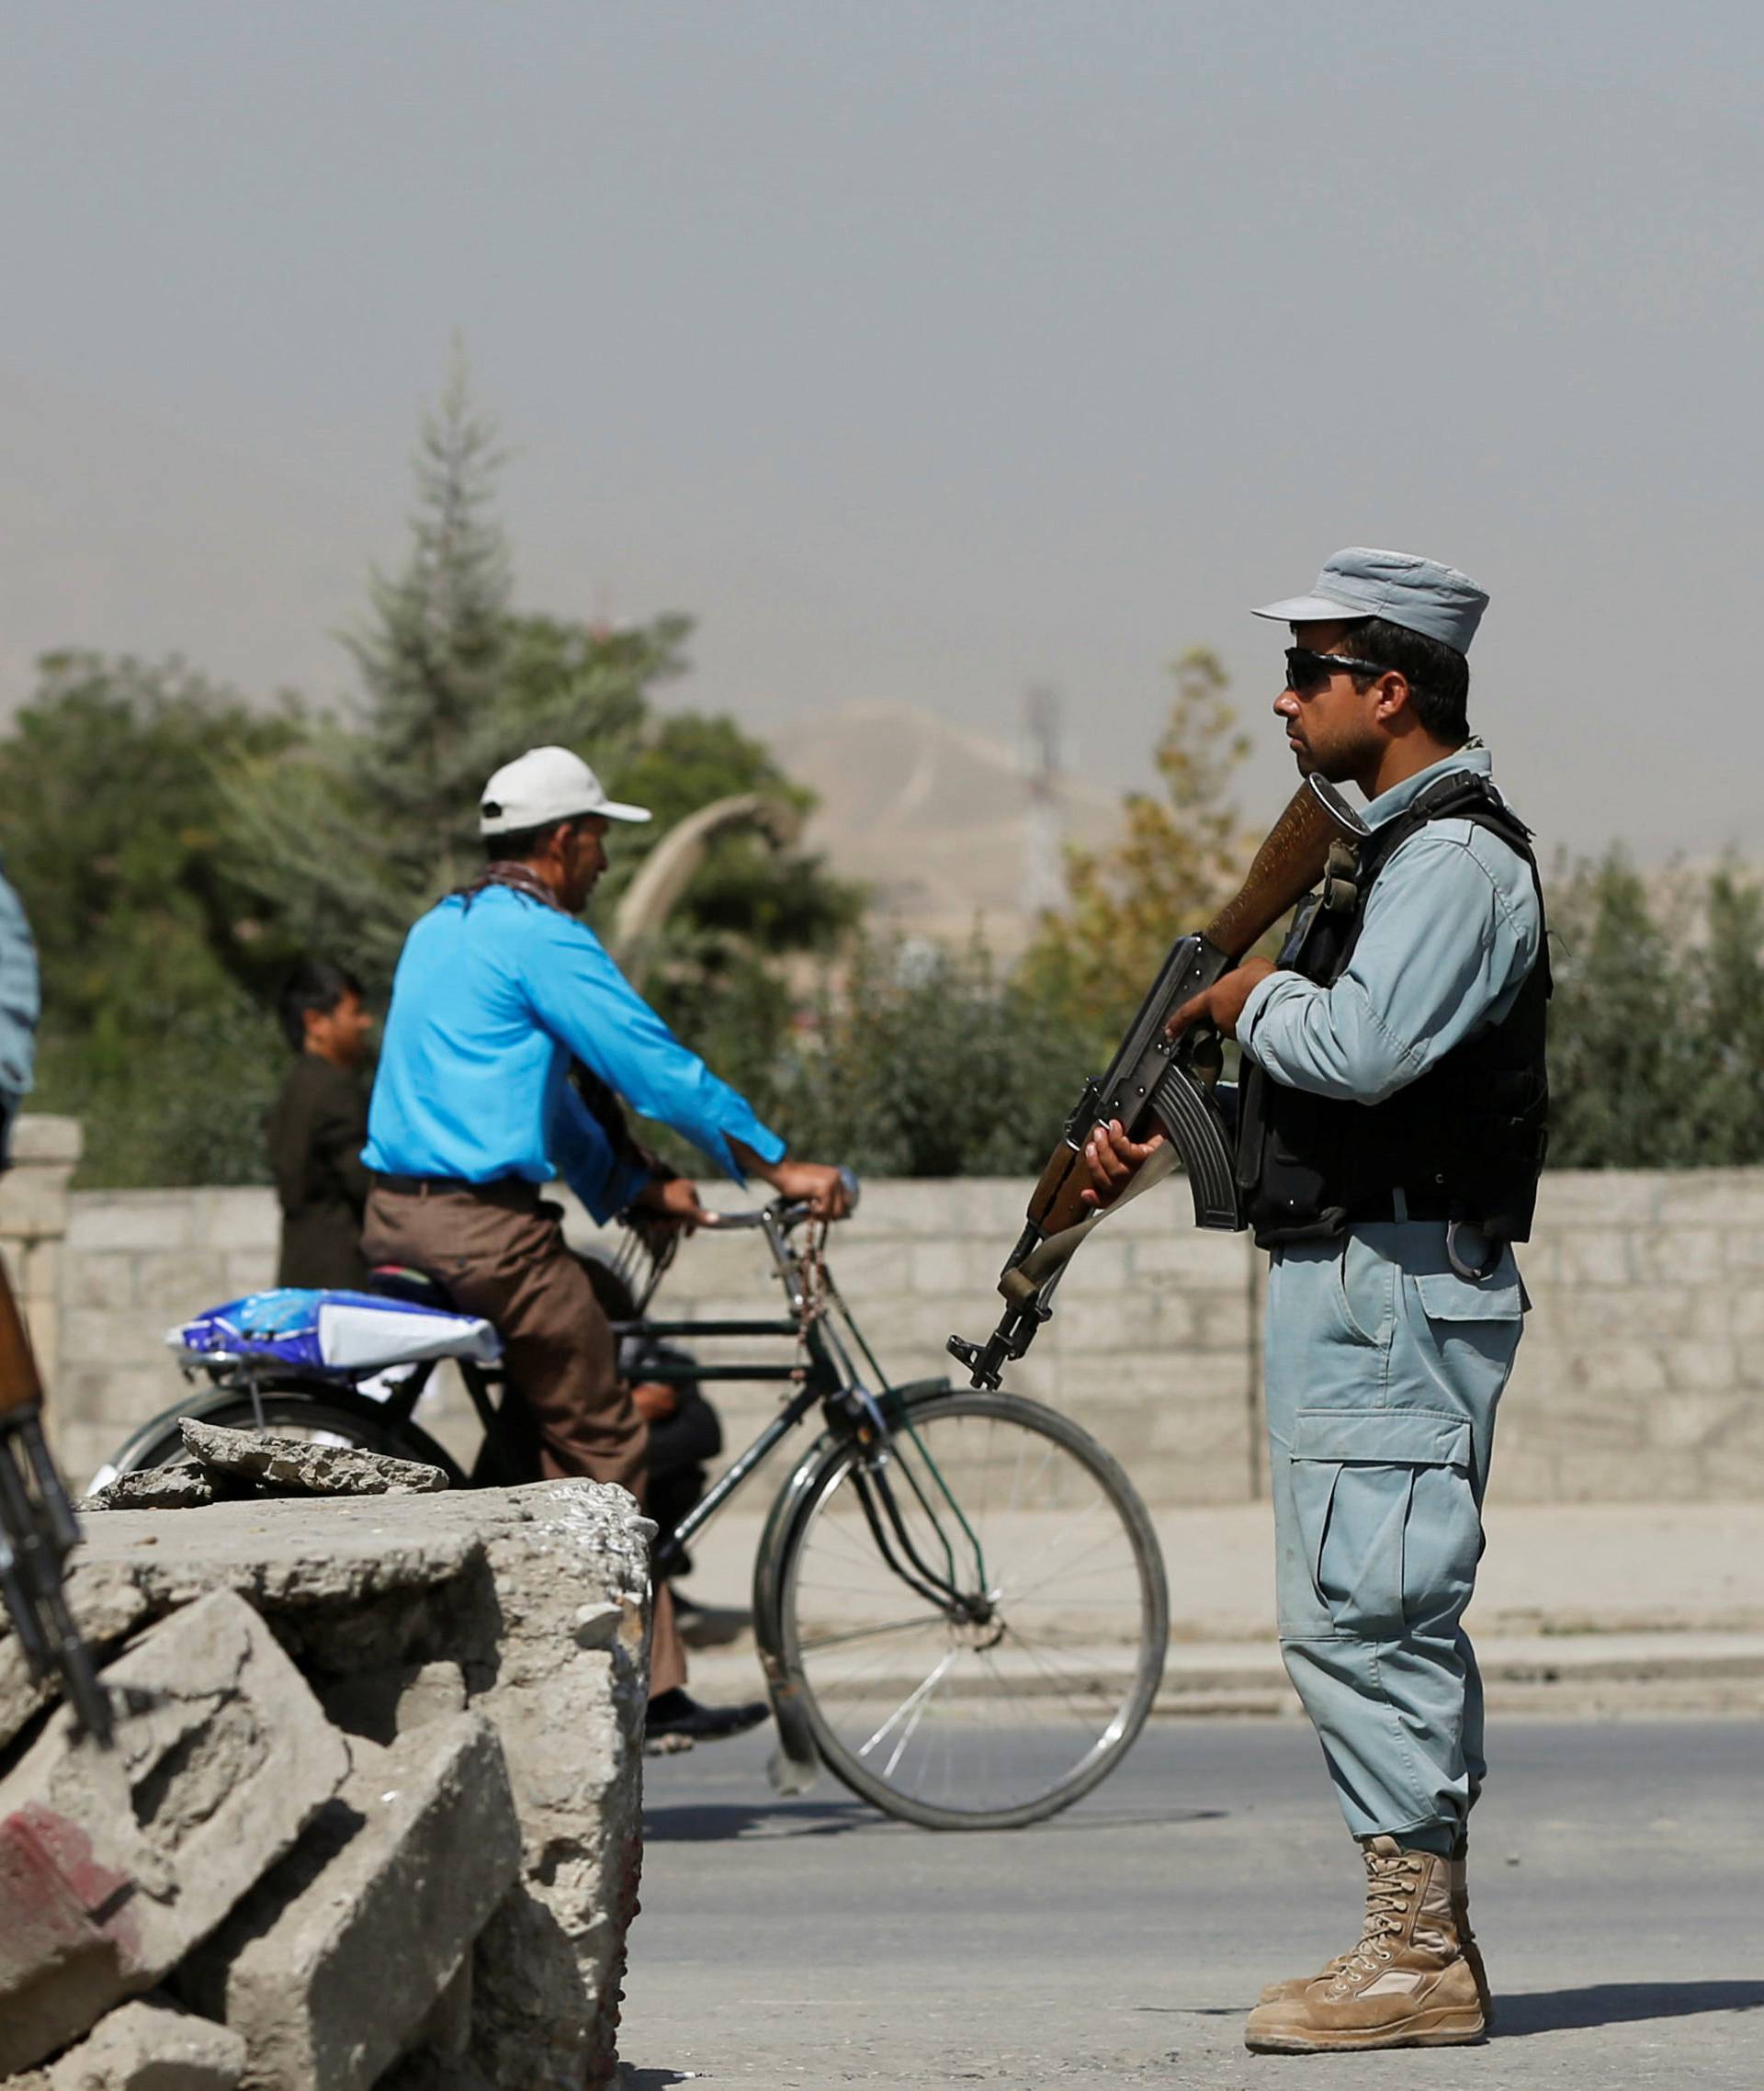 Afghan policemen stand guard at a checkpoint near the site of kidnapping in Kabul, 